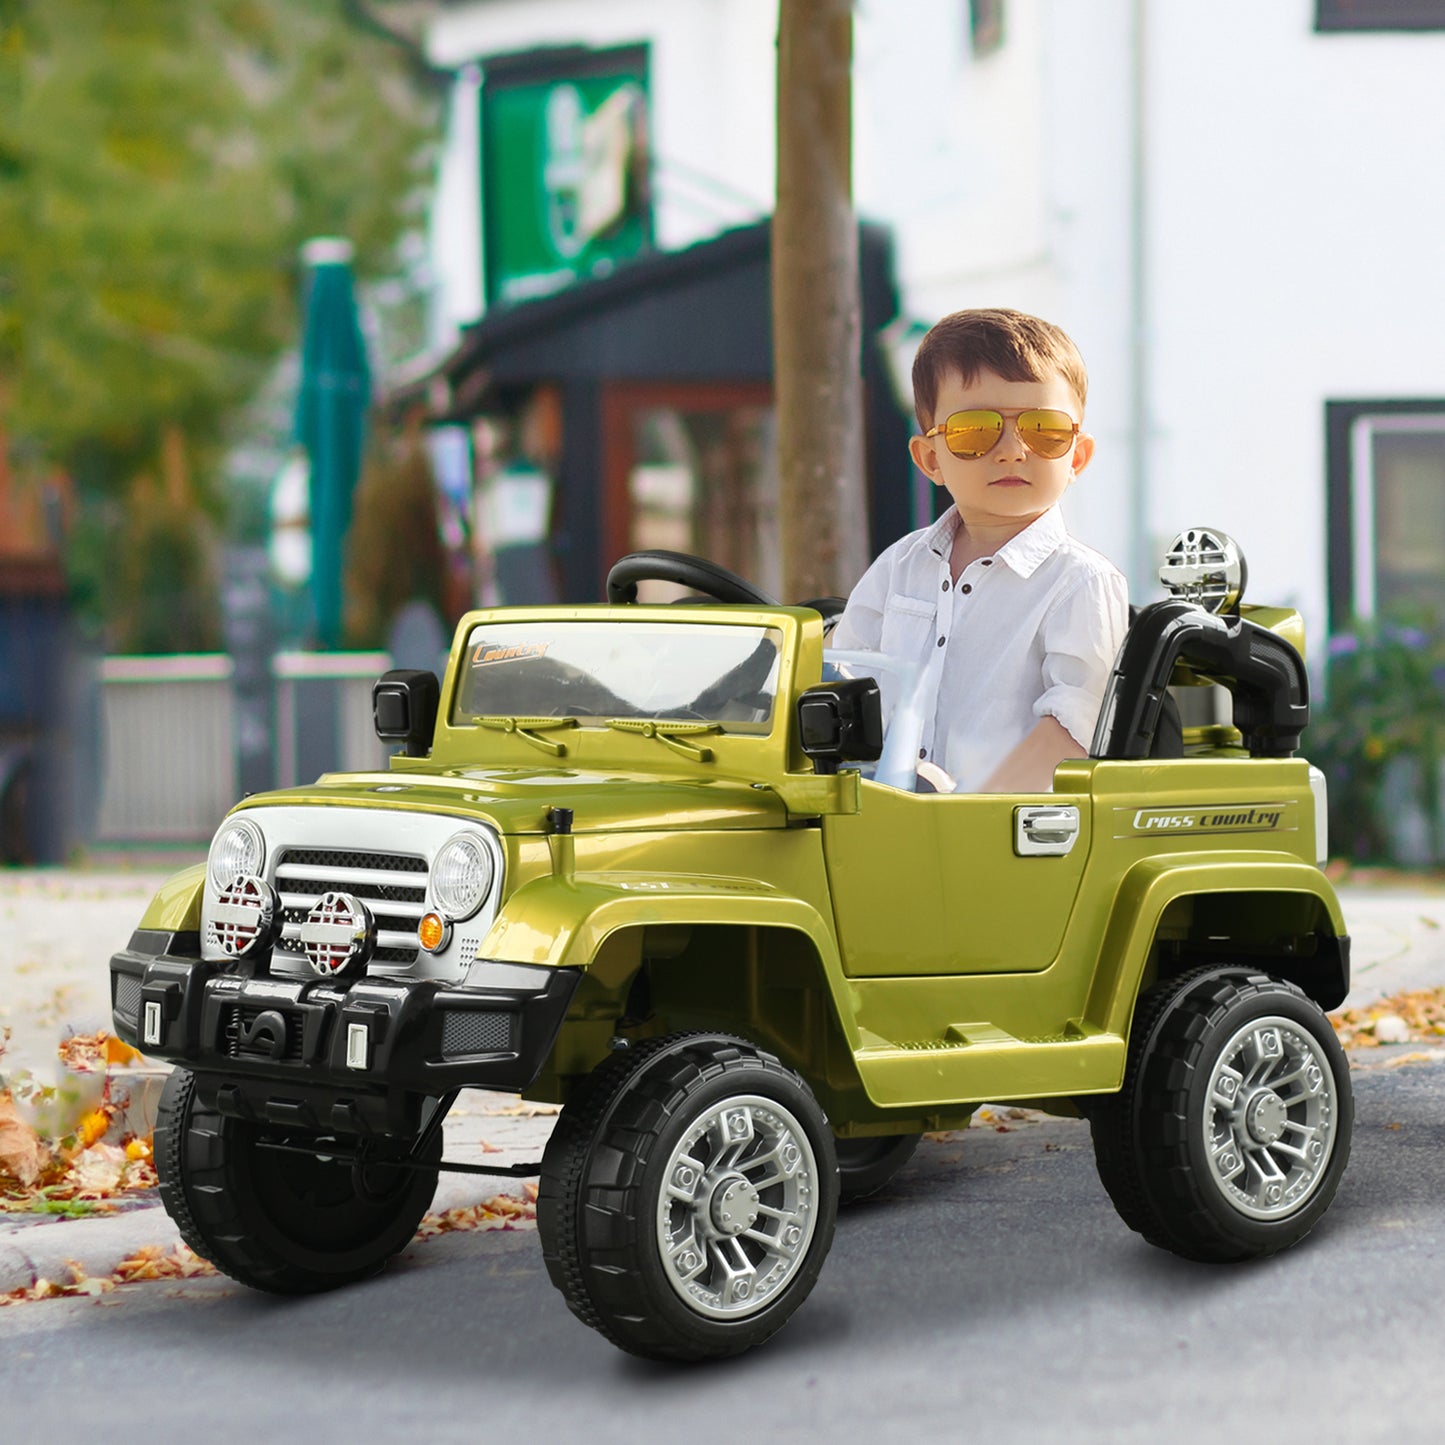 Aosom 12V Kids Electric Ride On Toy Truck Jeep Car With Remote Control